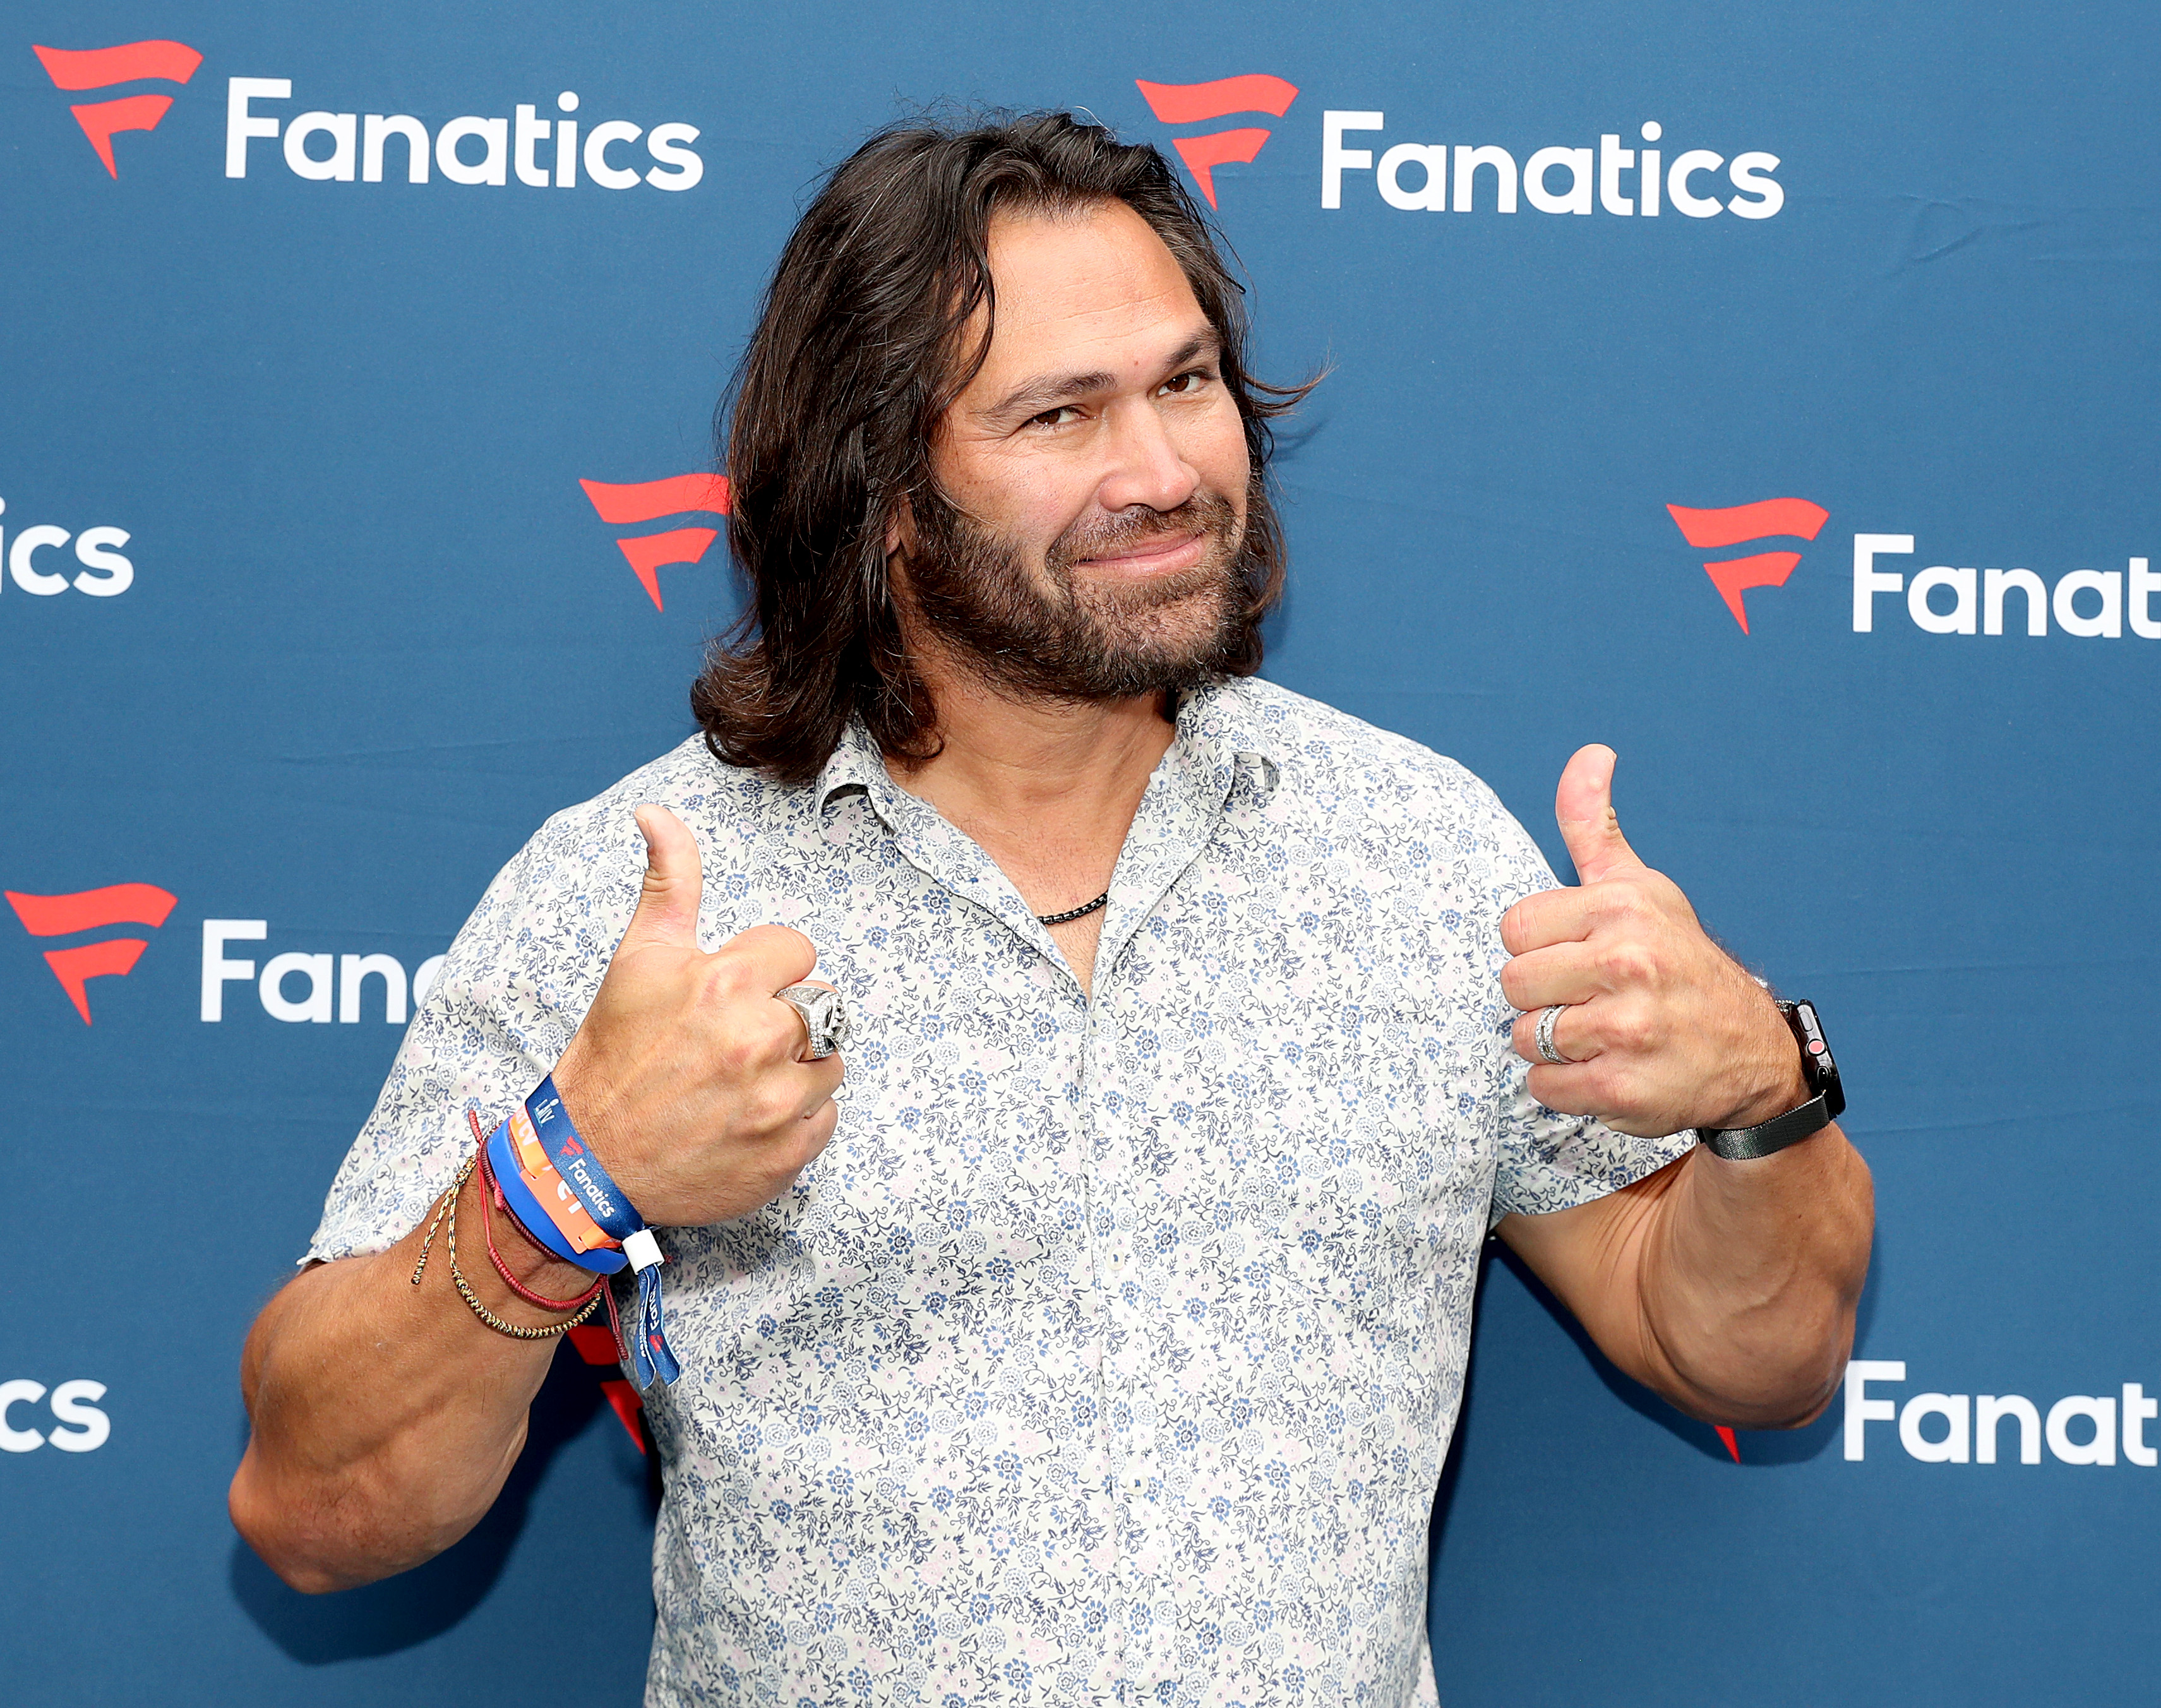 Comparisons between Celtics and 2004 Red Sox pile up, Johnny Damon